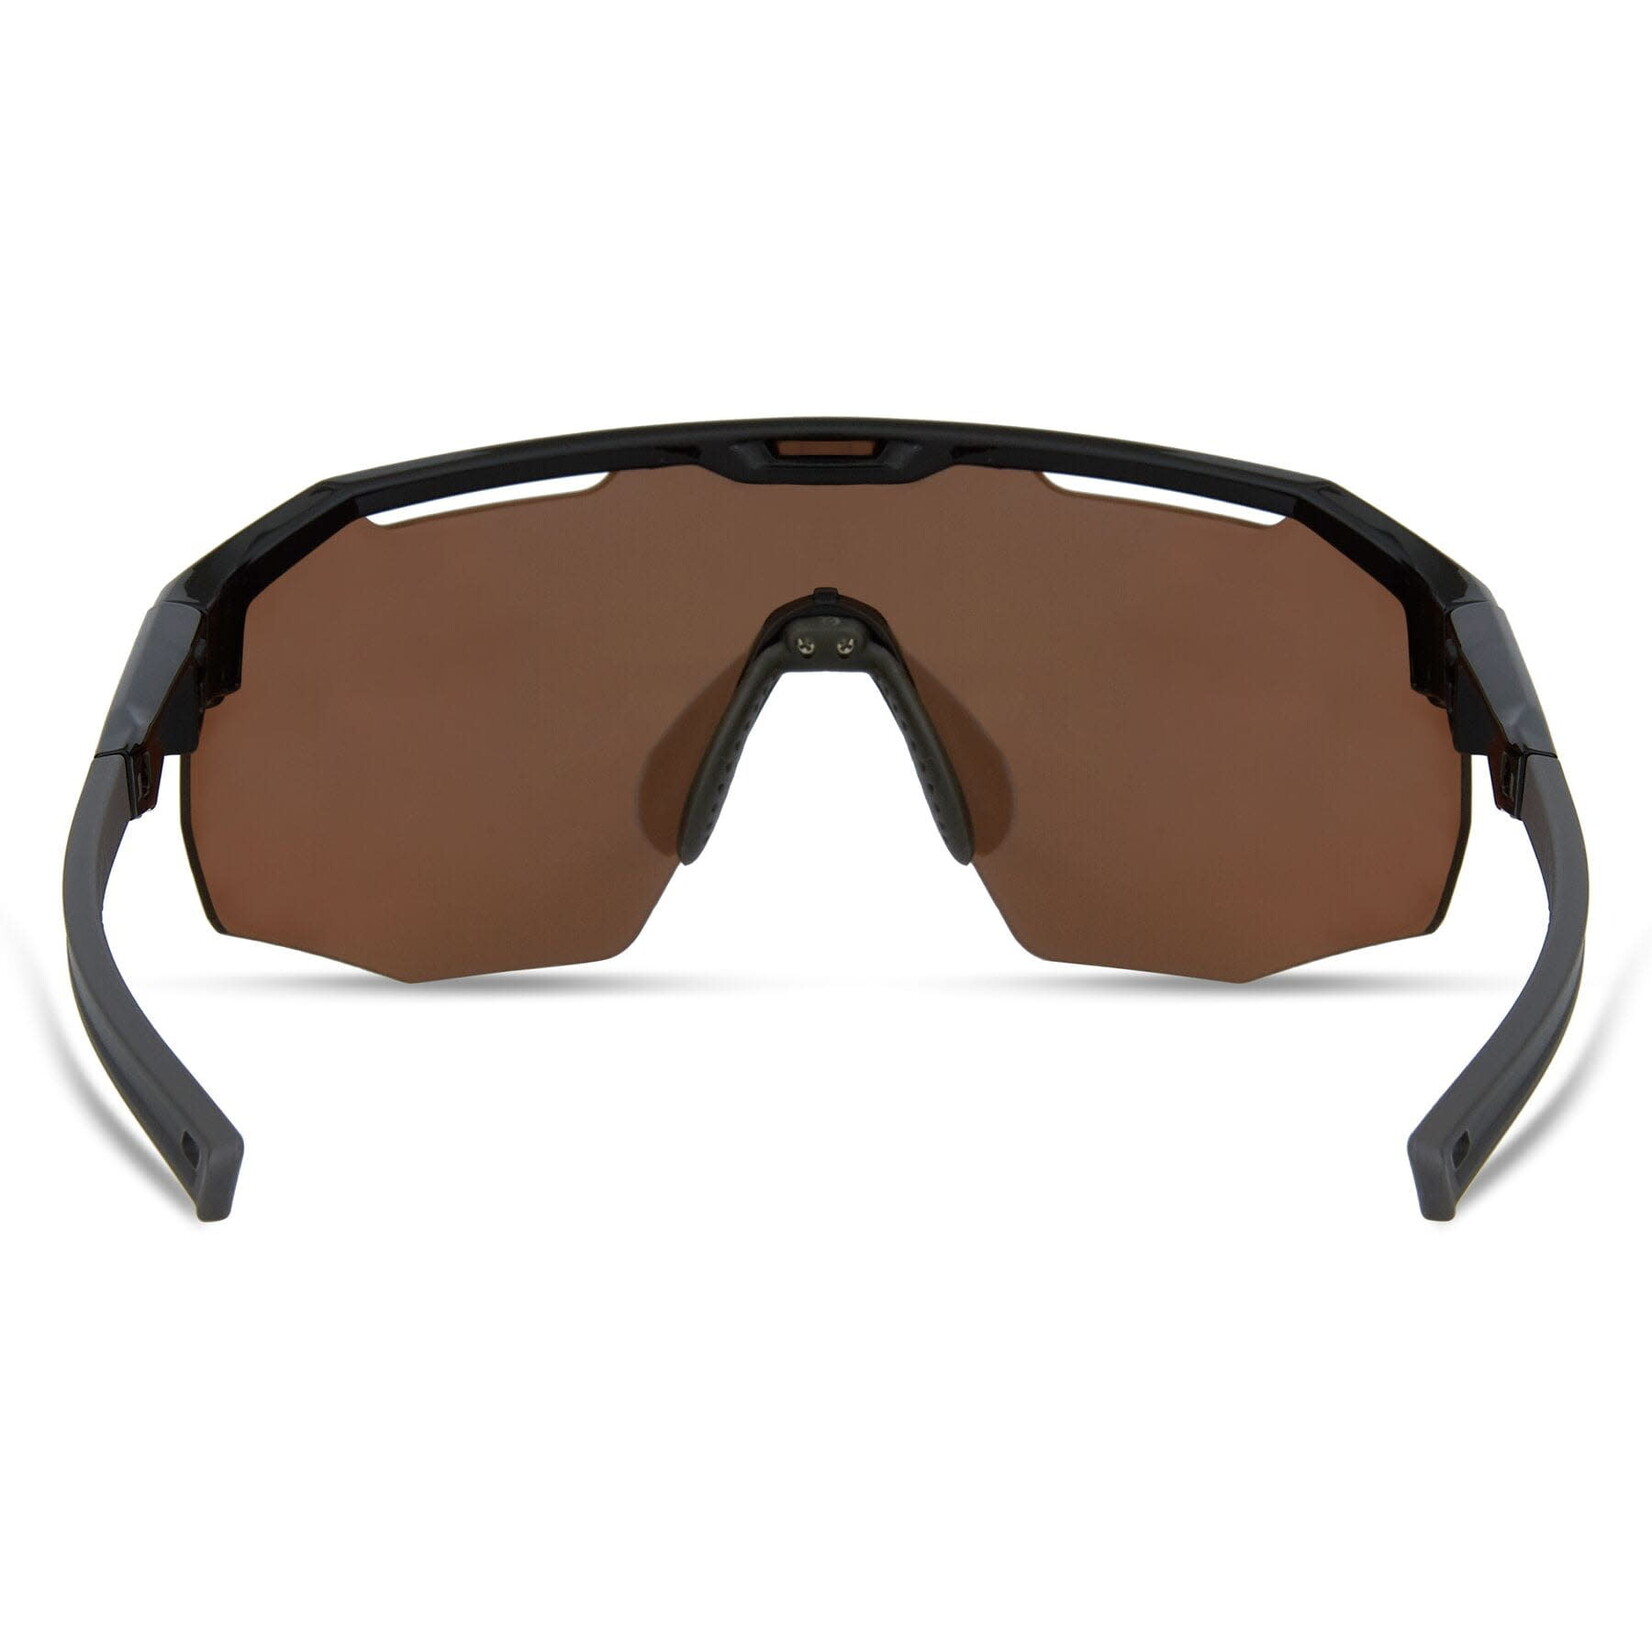 Madison Madison Cipher Glasses - 3 pack - gloss black / bronze mirror / amber and clear lens Sunglasses